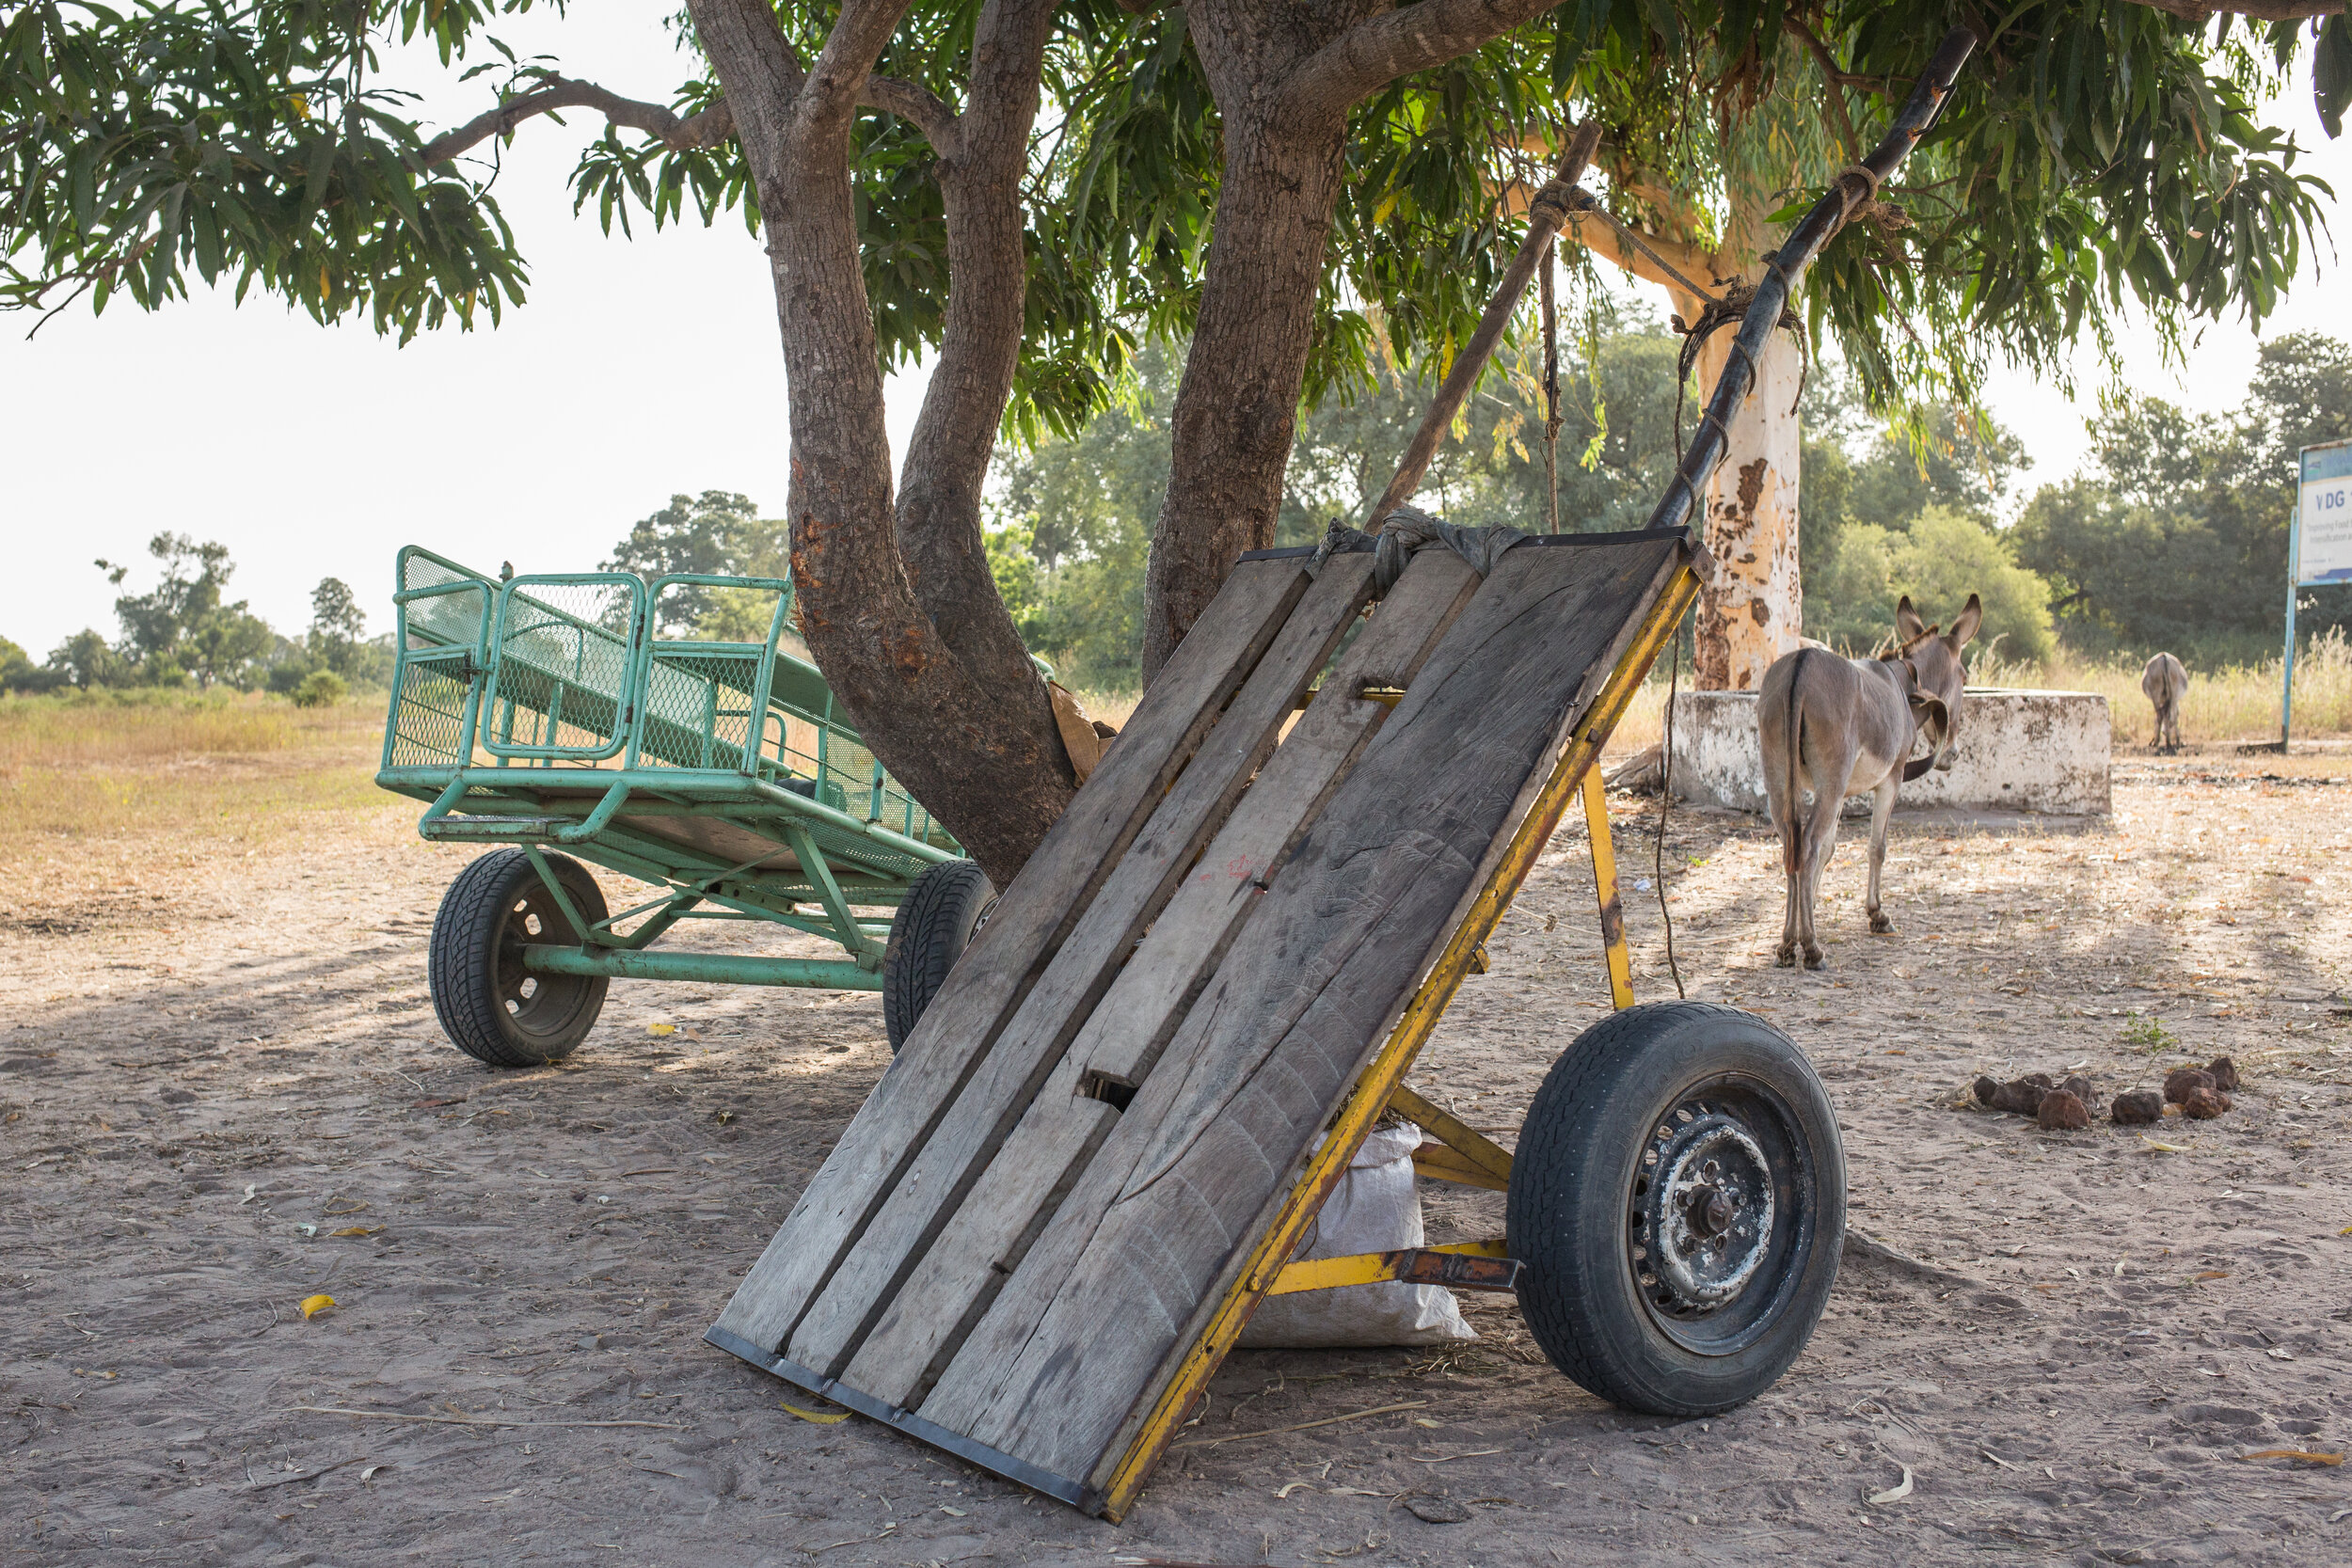  A new cart and an old donkey cart. 